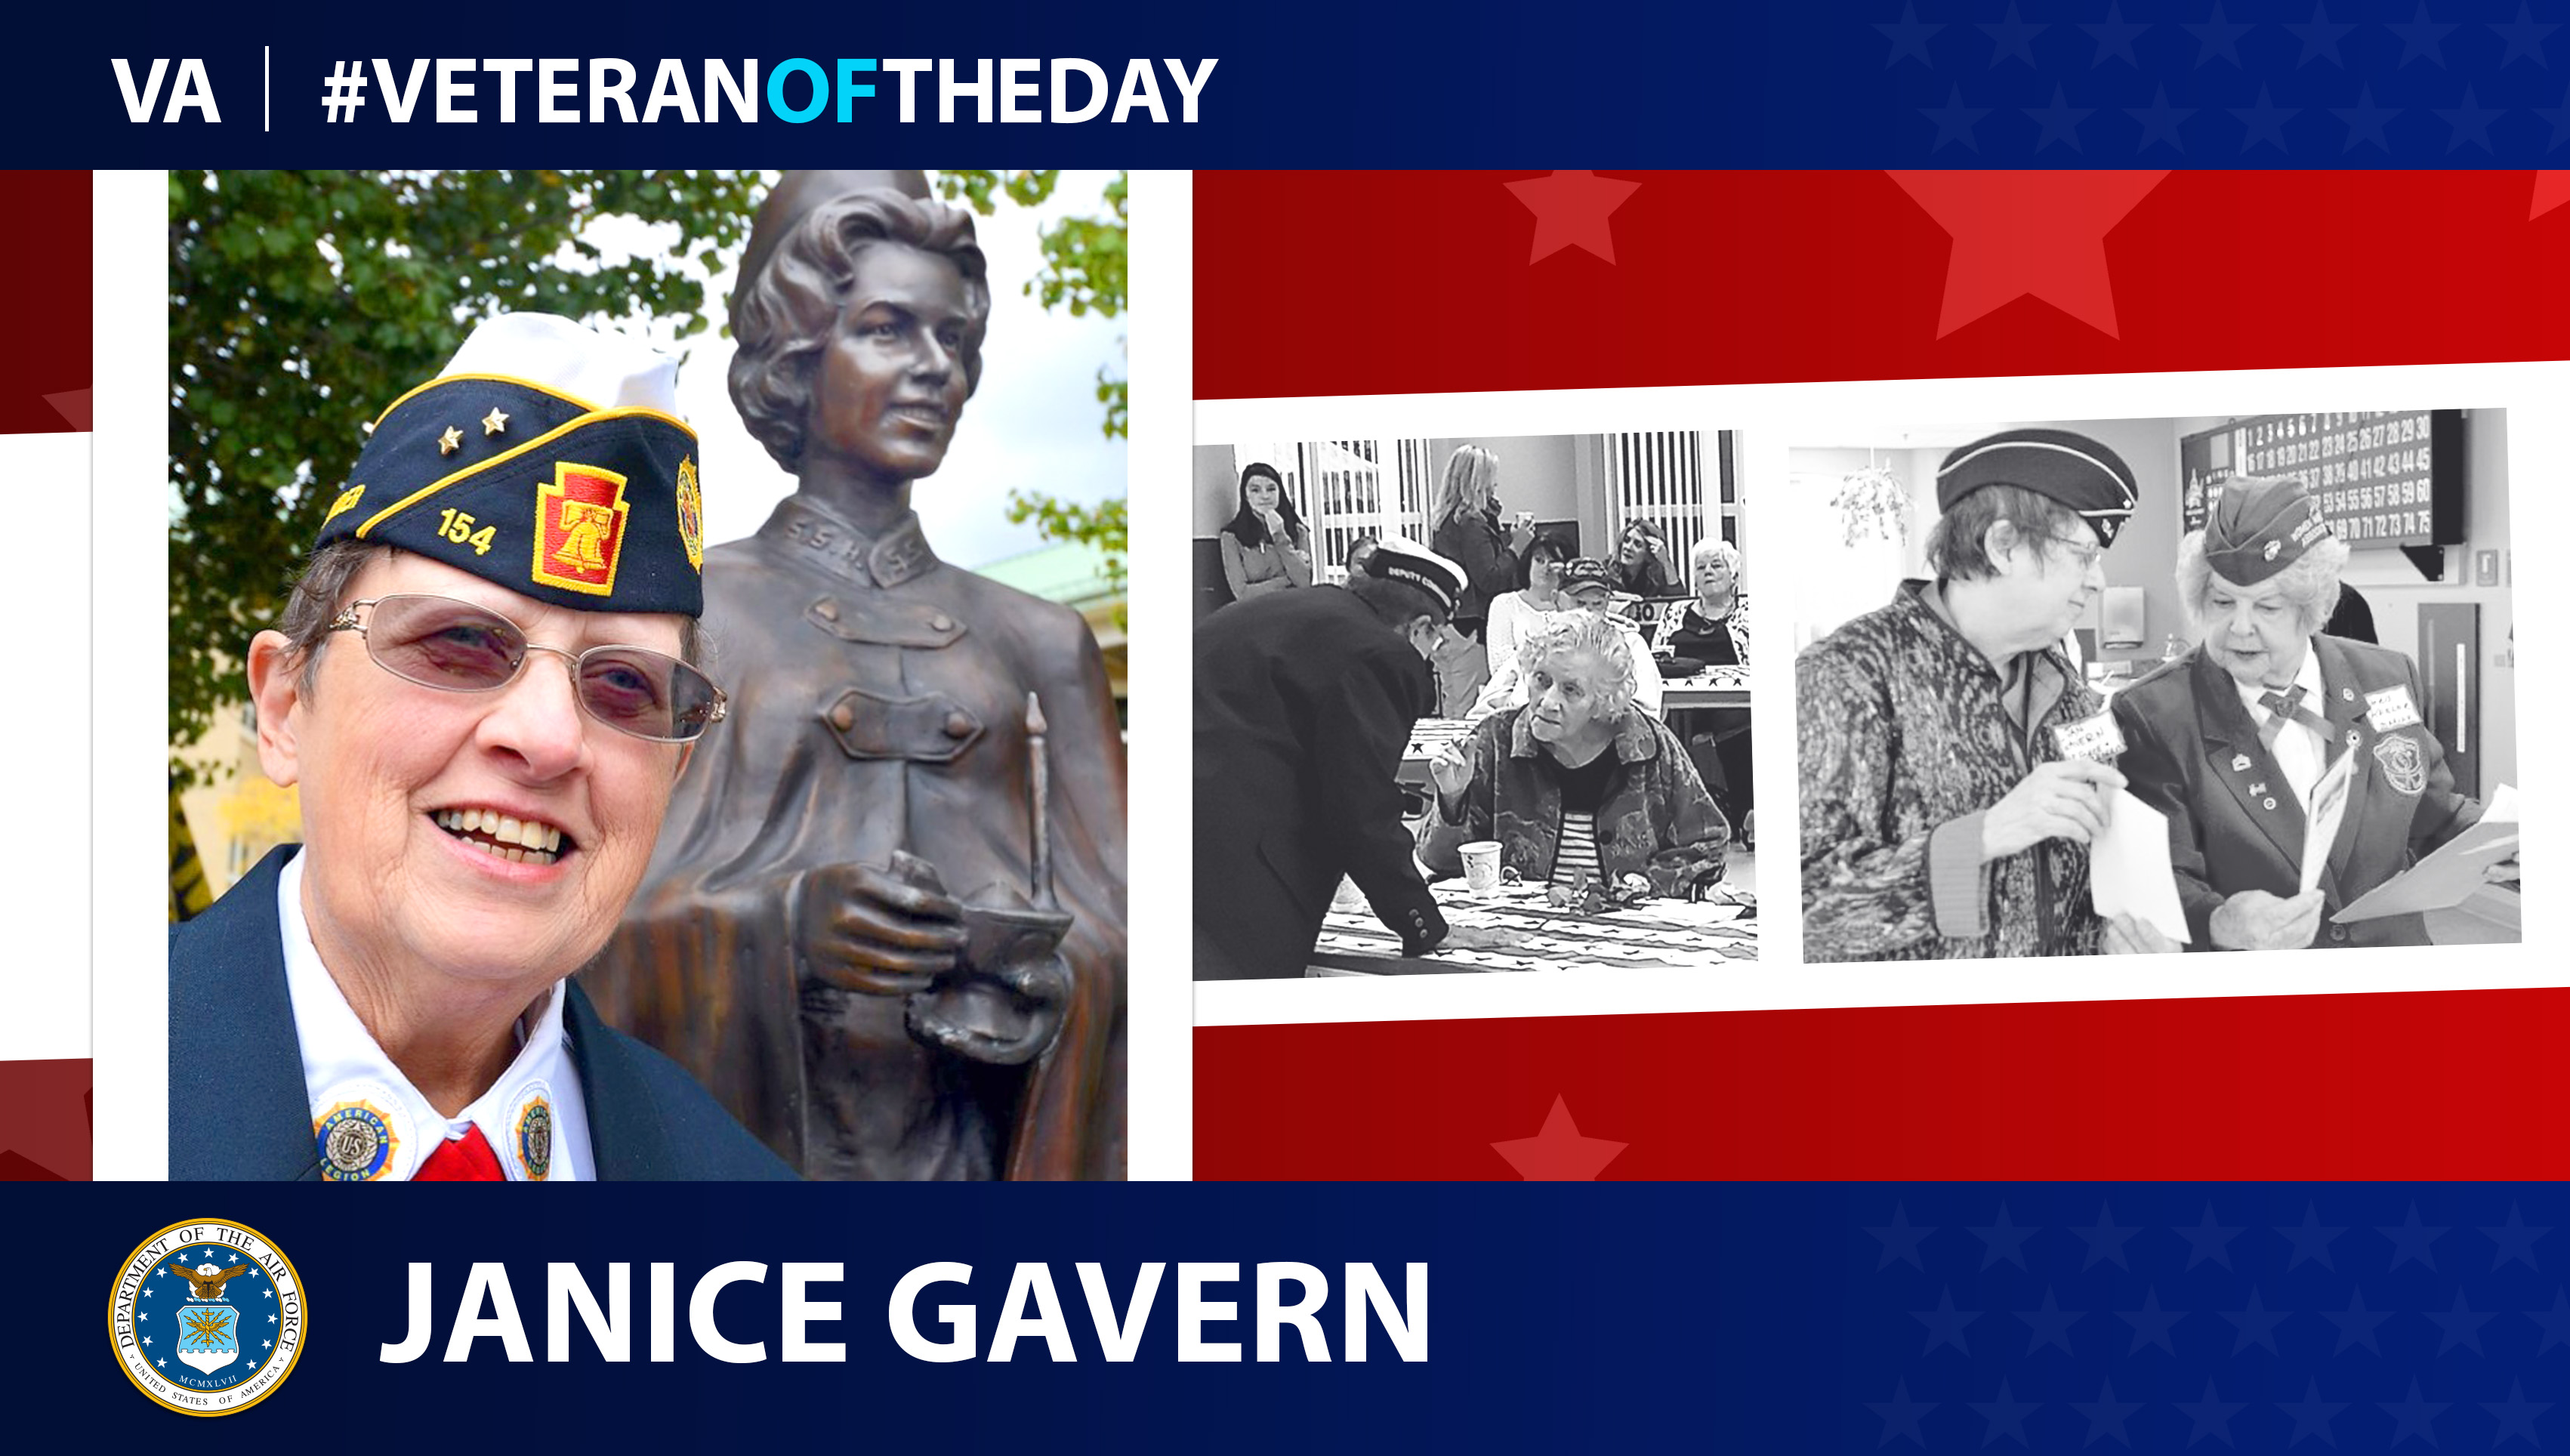 Janice Gavern is today's Veteran of the Day.